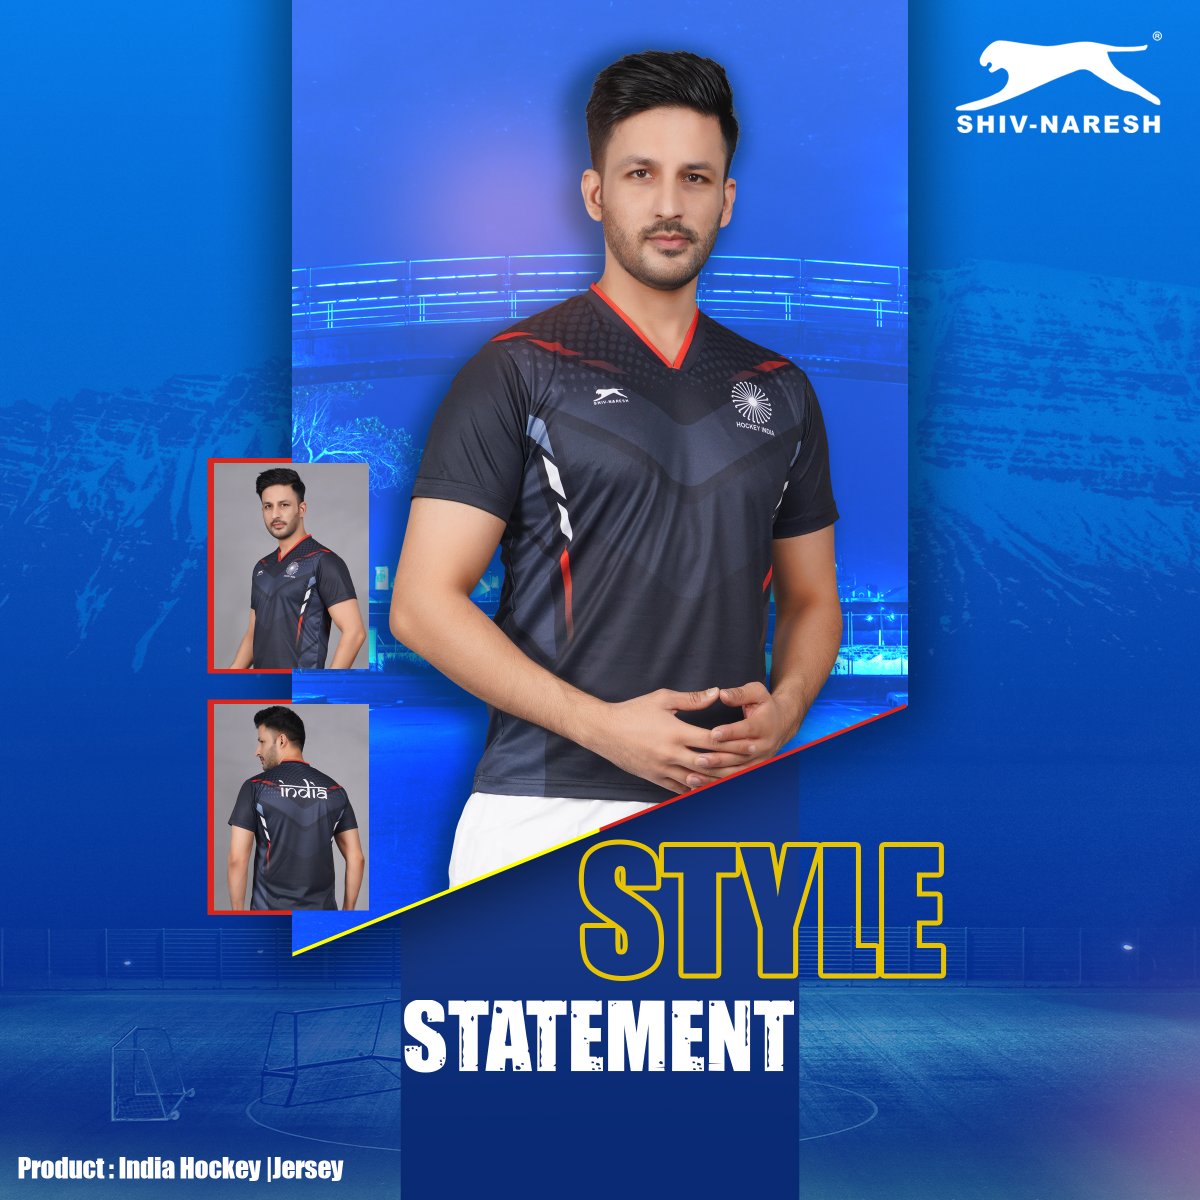 Stay ahead of the game with our stylish Indian Hockey attire. Look awesome, feel great, and unleash your inner champion. Let's make every moment count!
Visit www.shivnaresh to know more.  

#ShivNaresh #BharatKaBrand #DeshKiVardi #activewear #casualwear #sportswear #TeamIndia…